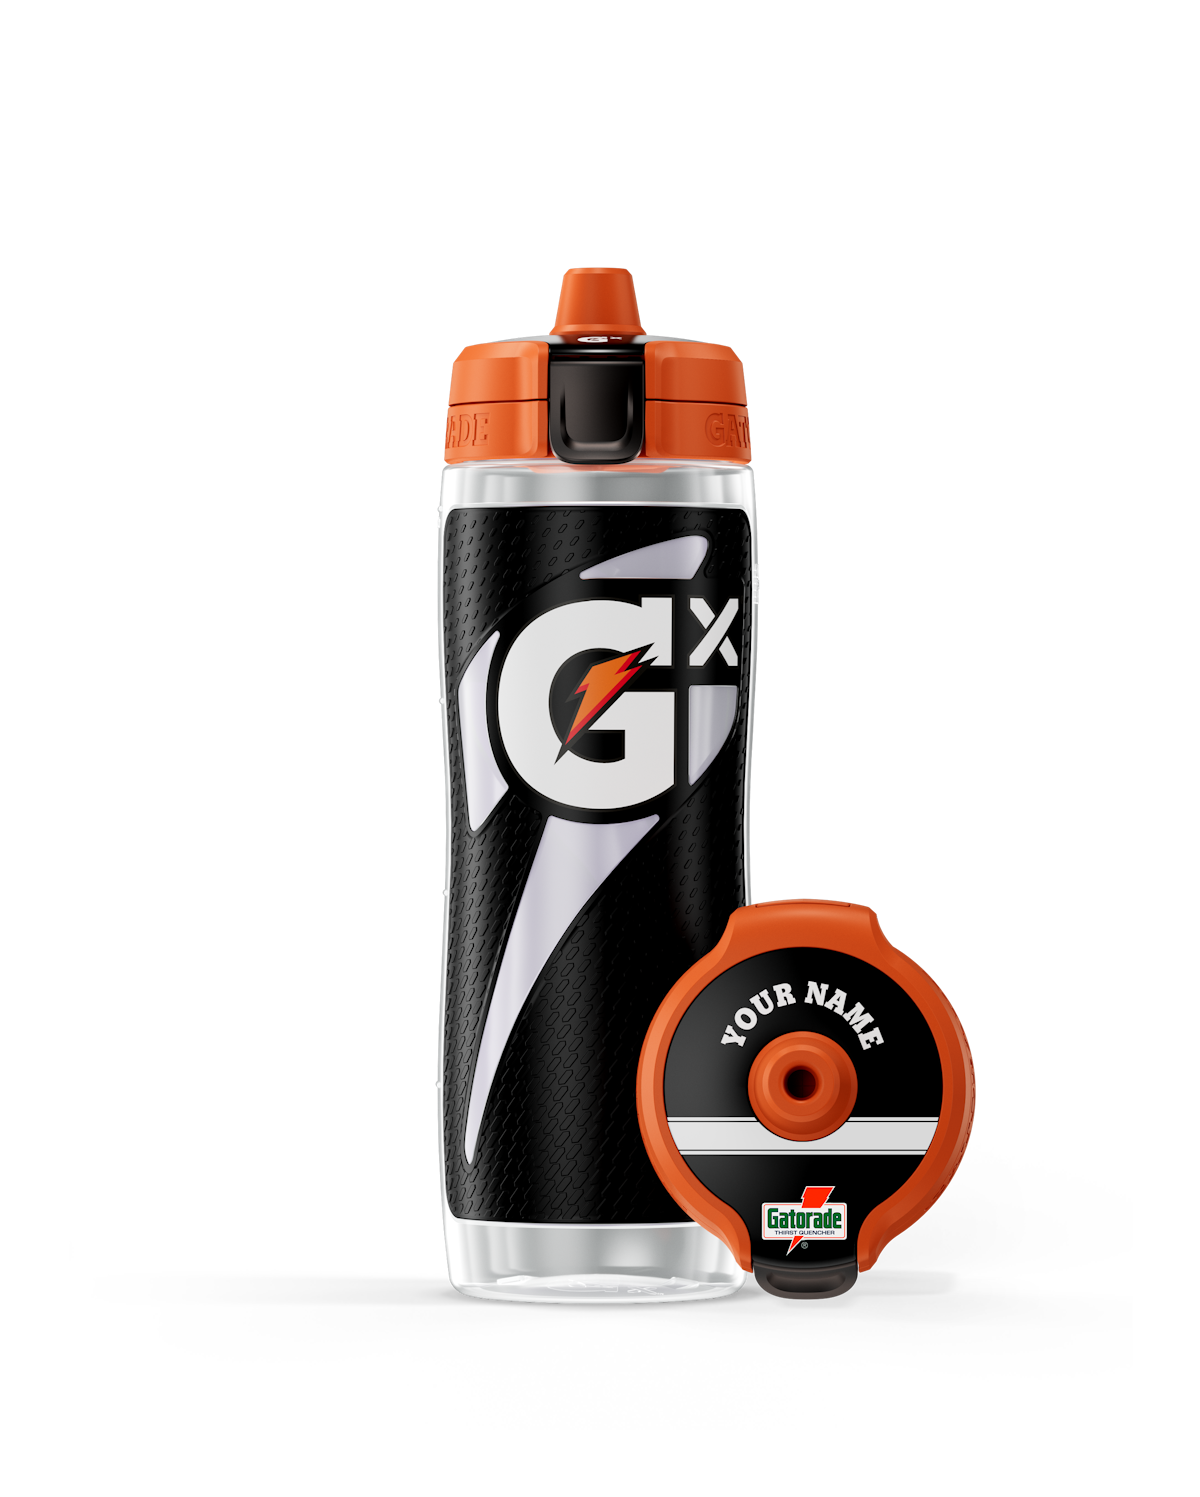 https://www.datocms-assets.com/101859/1693589589-gxbottle_exclusive_retro_black_2680x3344.png?auto=format&fit=fill&w=1200&ar=4%3A3&fill=solid